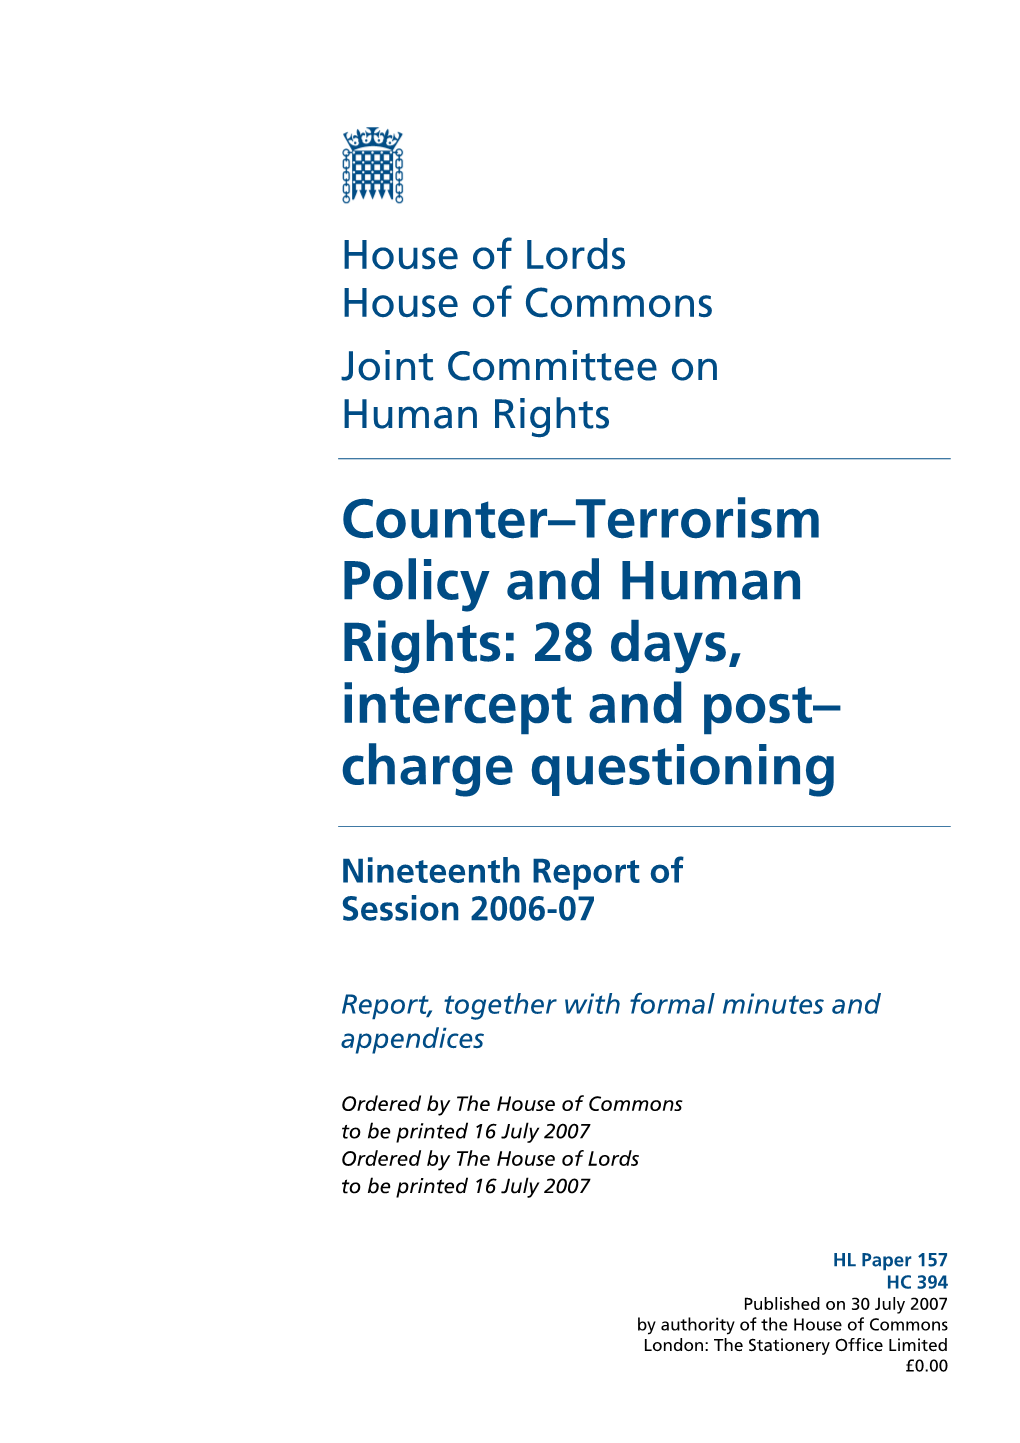 Counter–Terrorism Policy and Human Rights: 28 Days, Intercept and Post– Charge Questioning